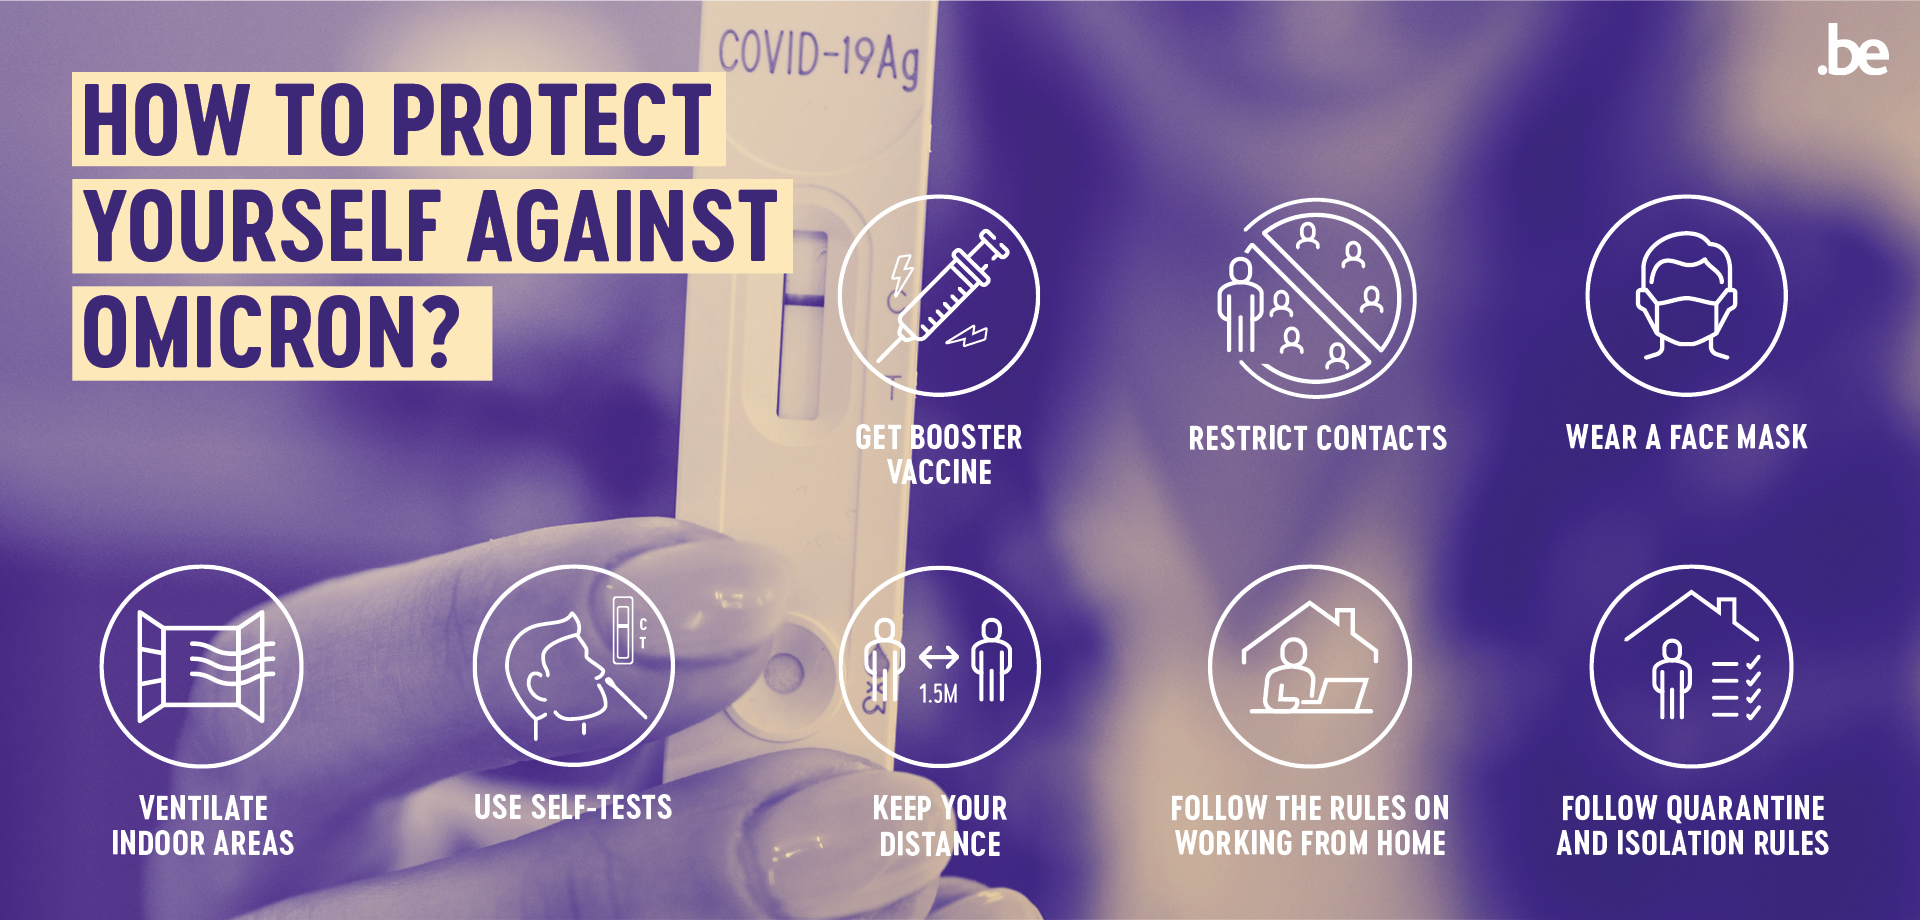 How to protect yourself against omicron? [8 pictograms]  Get booster vaccine. Restrict contacts. Wear a face mask. Ventilate indoor areas. Use self-tests. Keep your distance. Follow the rules on working from home. Follow quarantine and isolation rules.